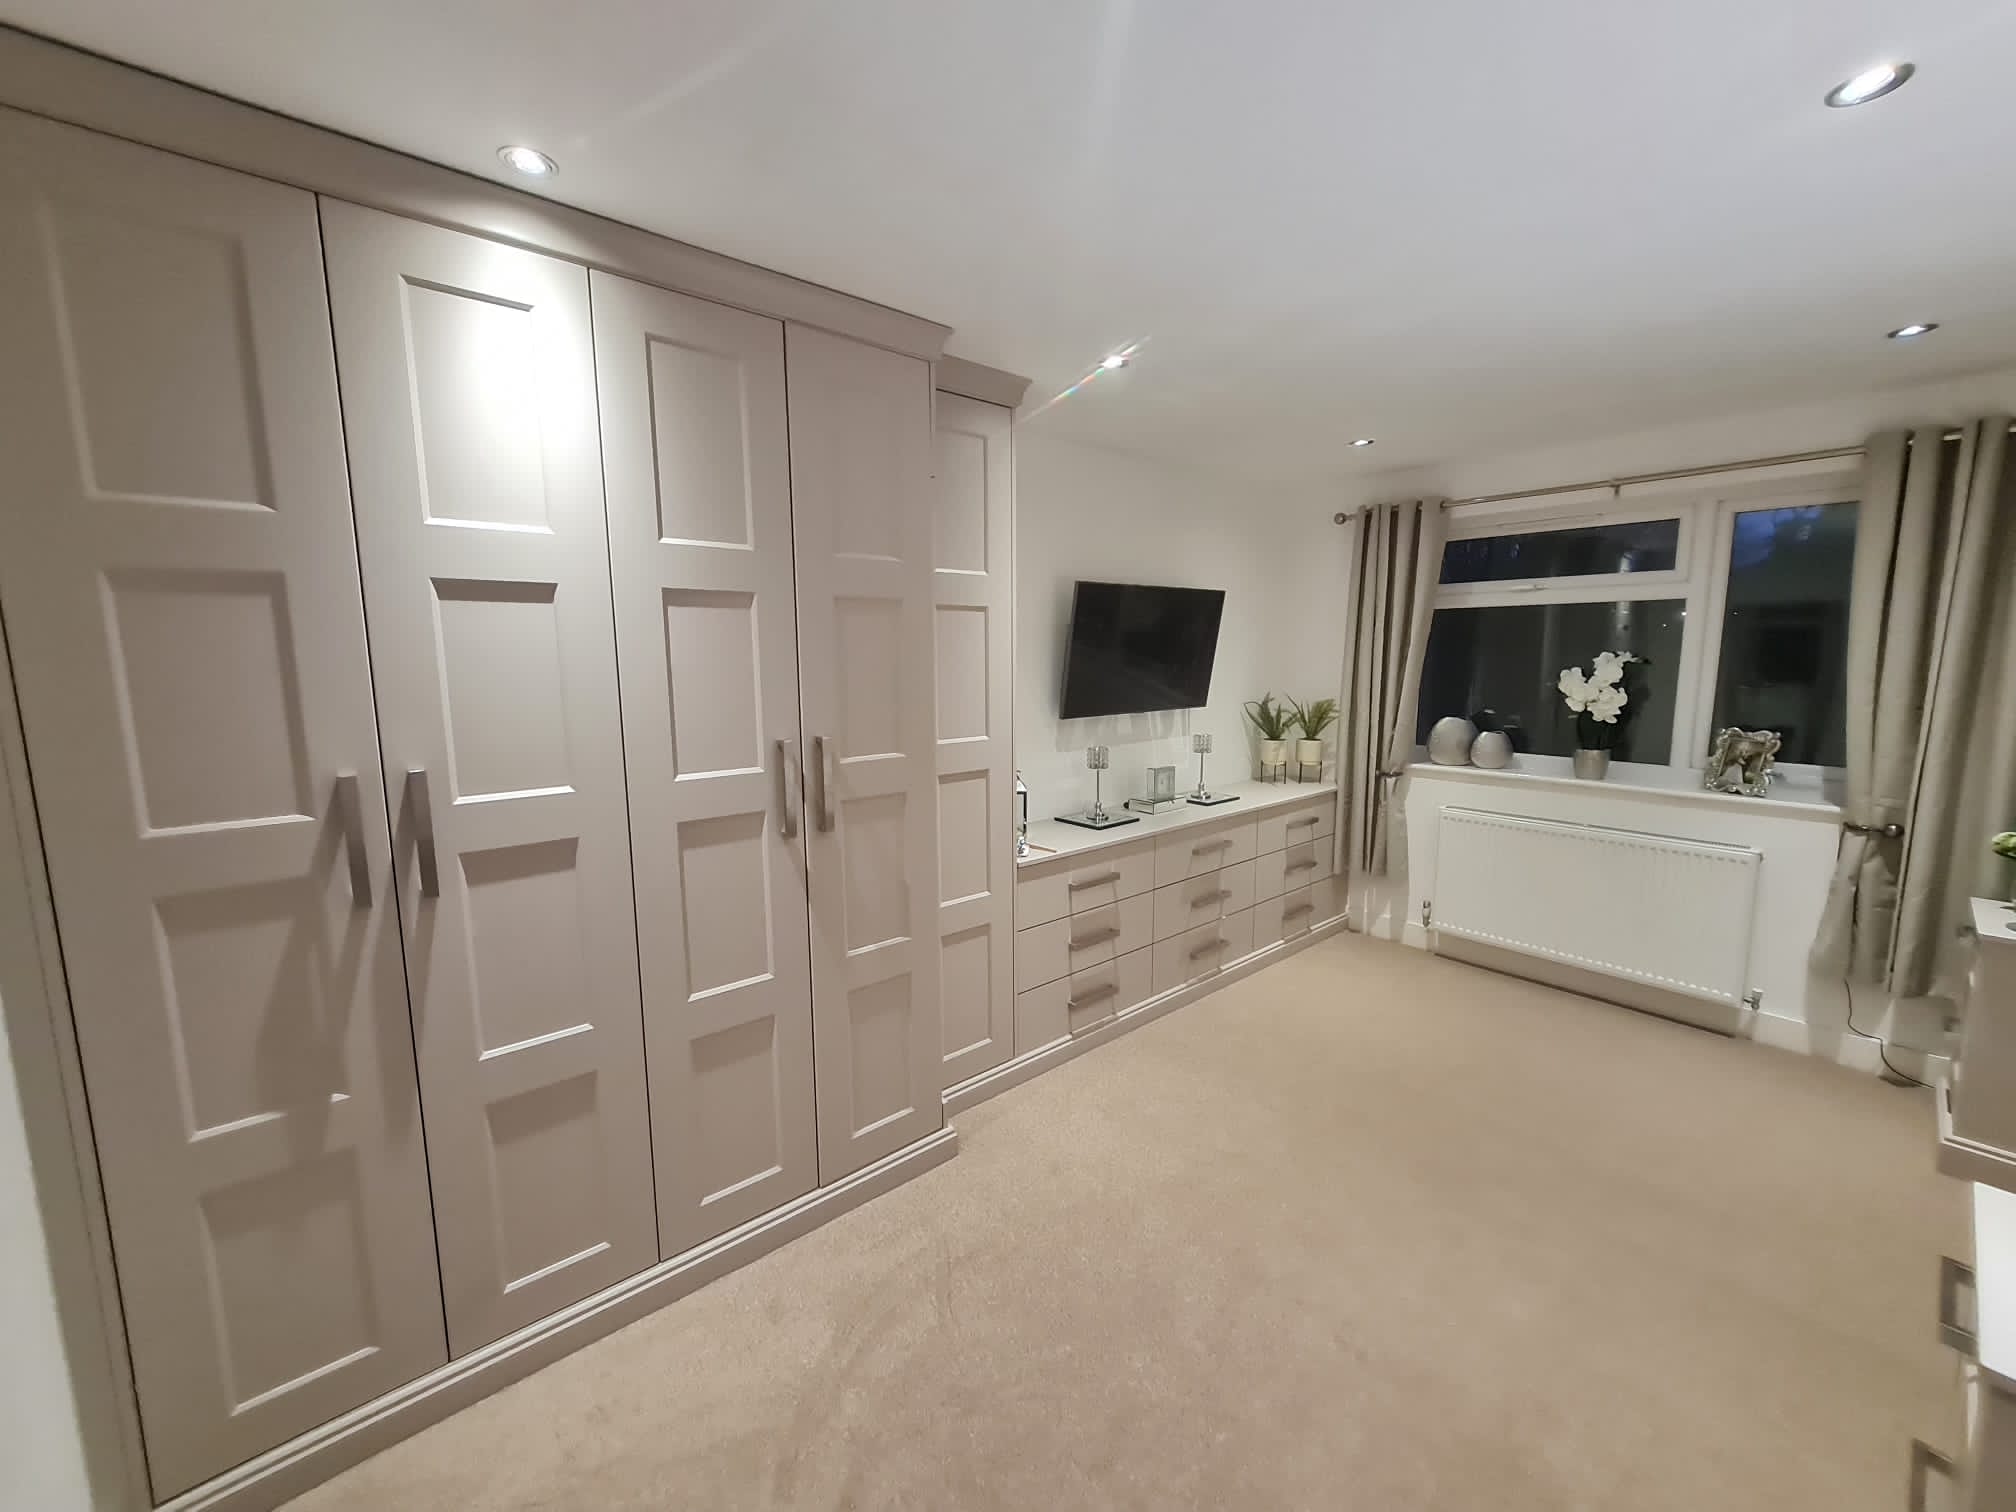 hand crafted fitted wardrobes and vanity unit with drawers.